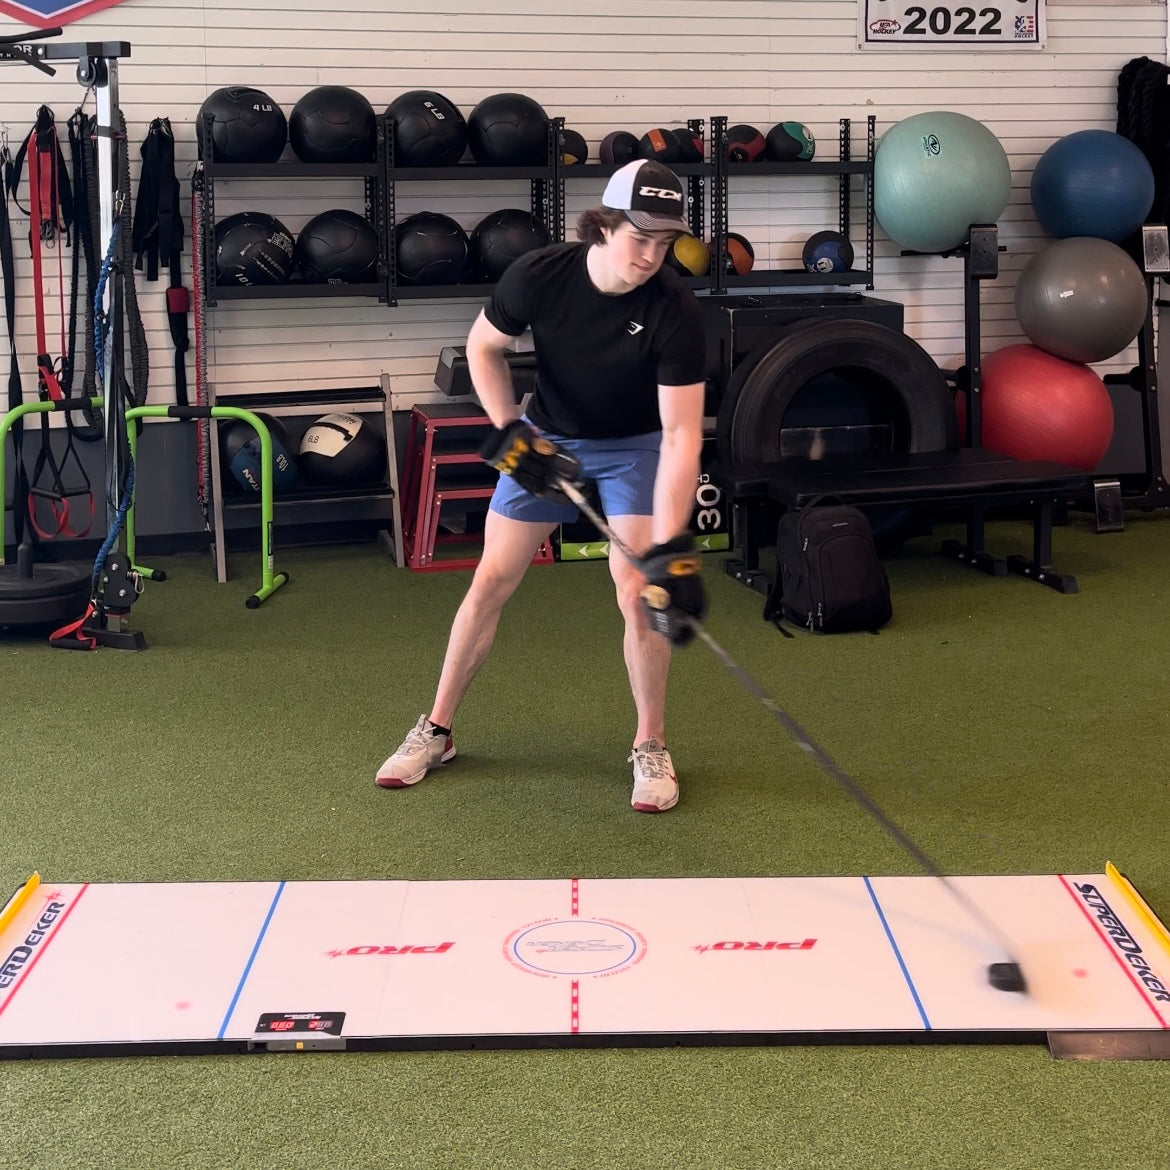 The SuperDekerPRO hockey stick handling trainer is a light up puck handling tool to play hockey drills at home.